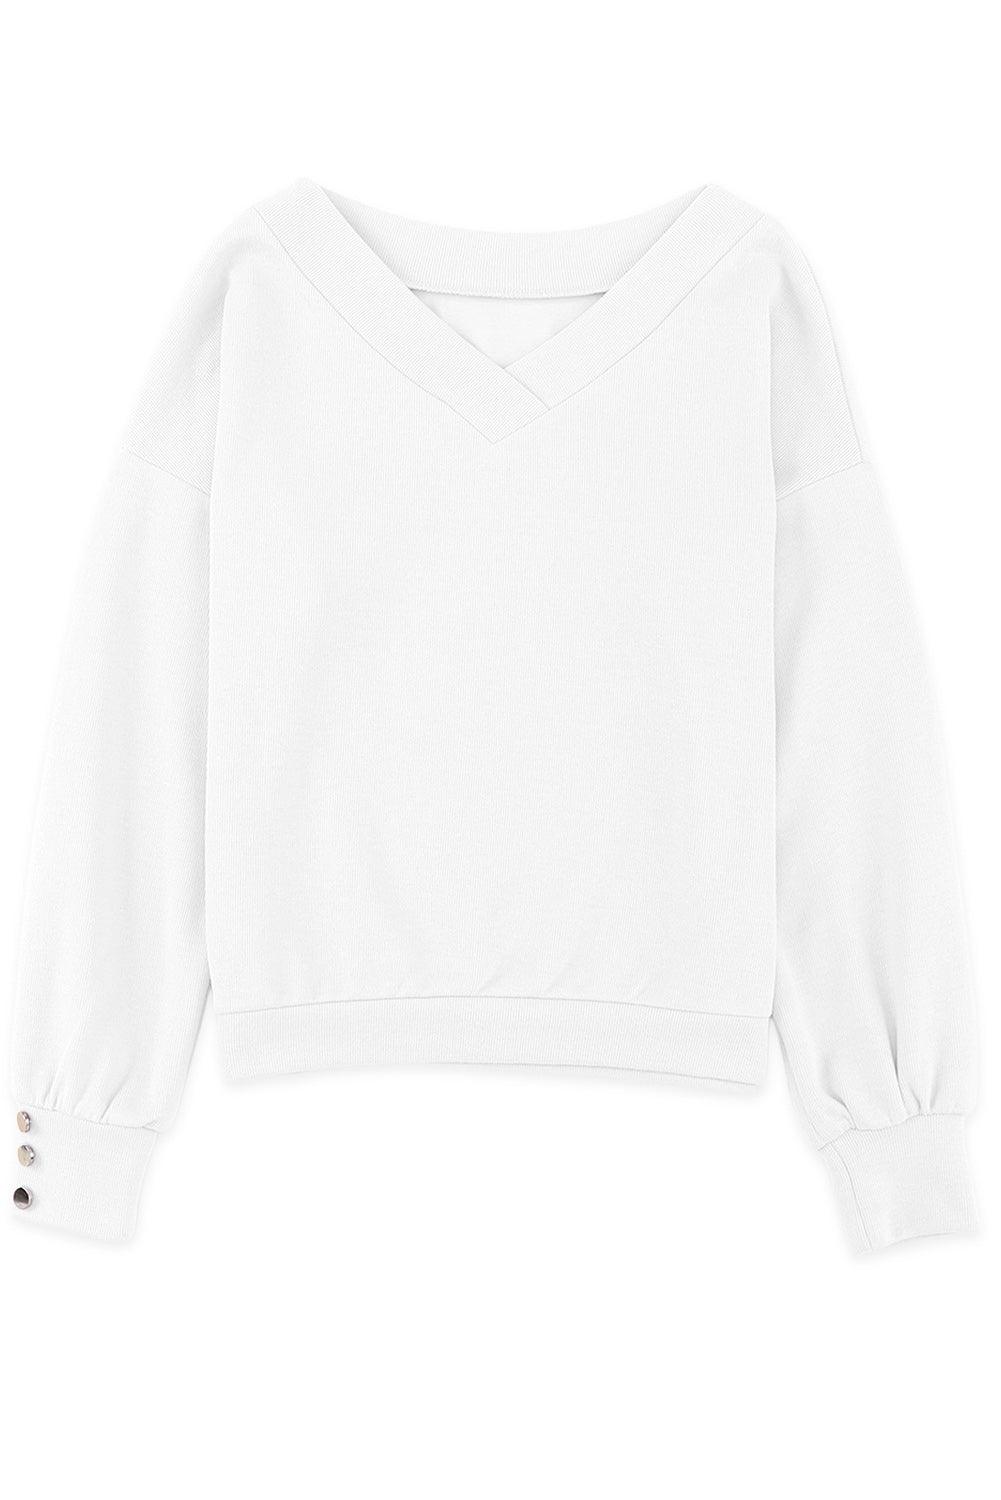 White Knitted V Neck Buttoned Cuffs Sweater - L & M Kee, LLC